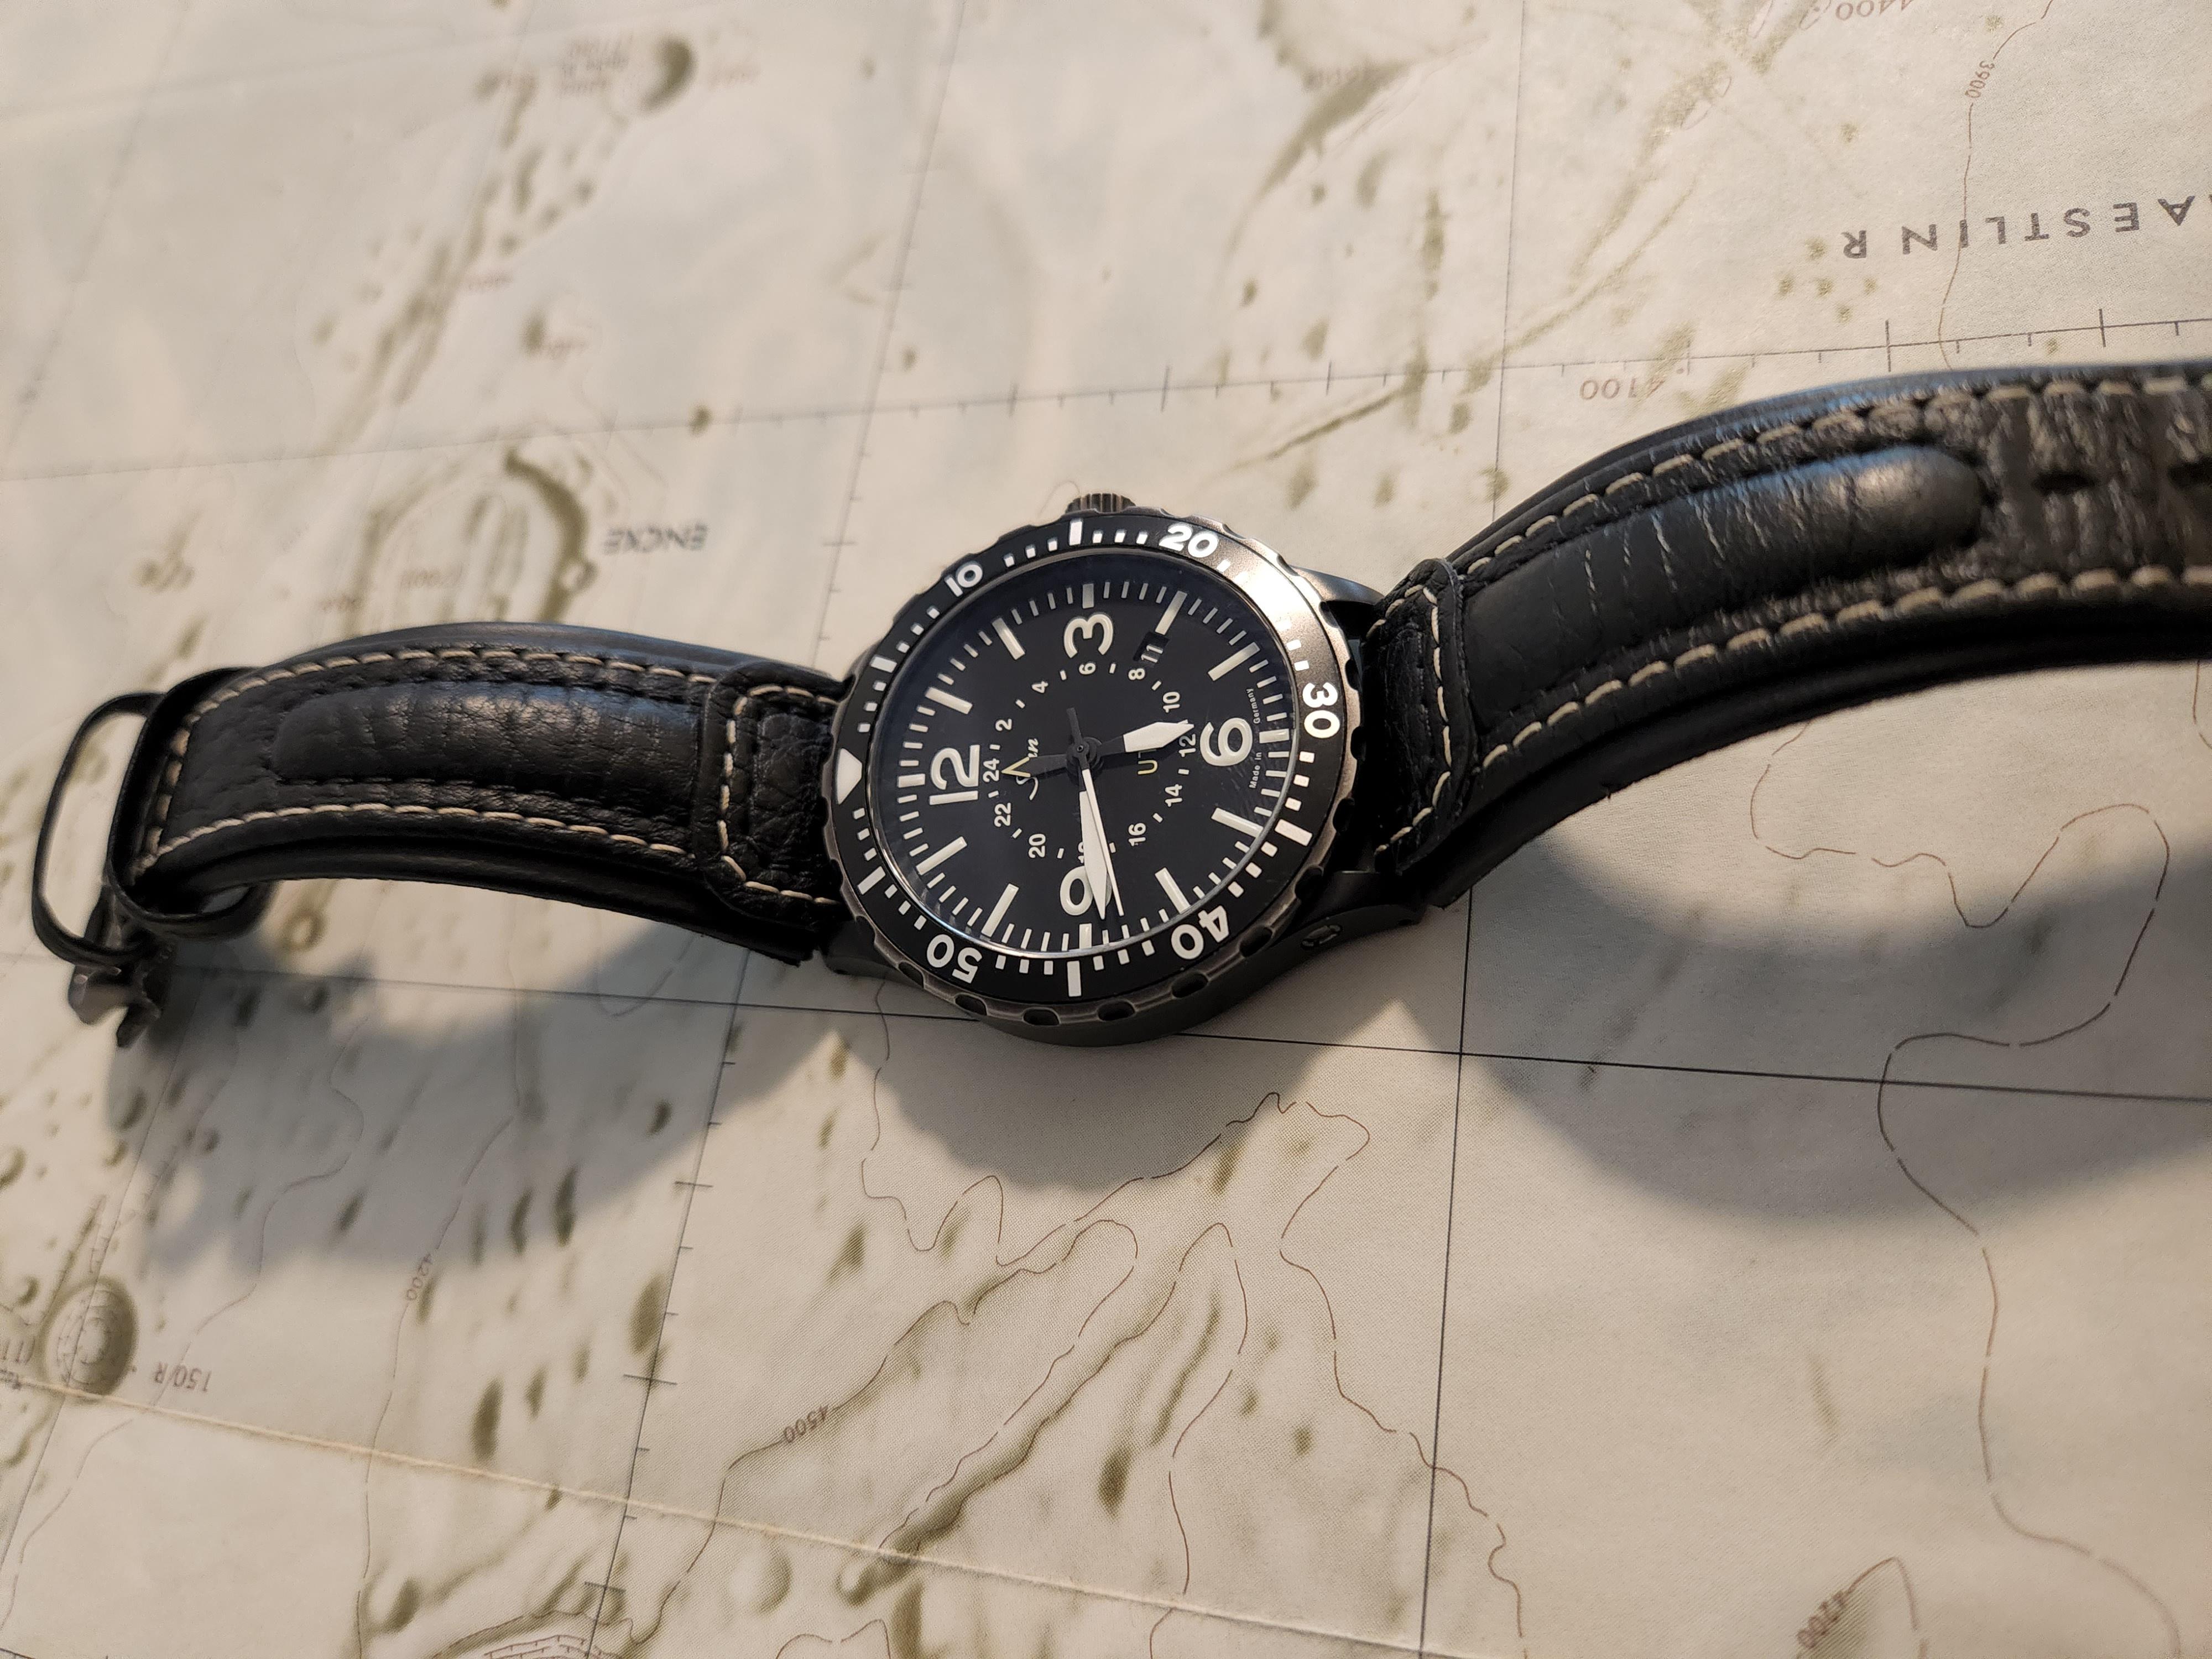 WTS] Damasko DC66 w/ box and papers : r/Watchexchange